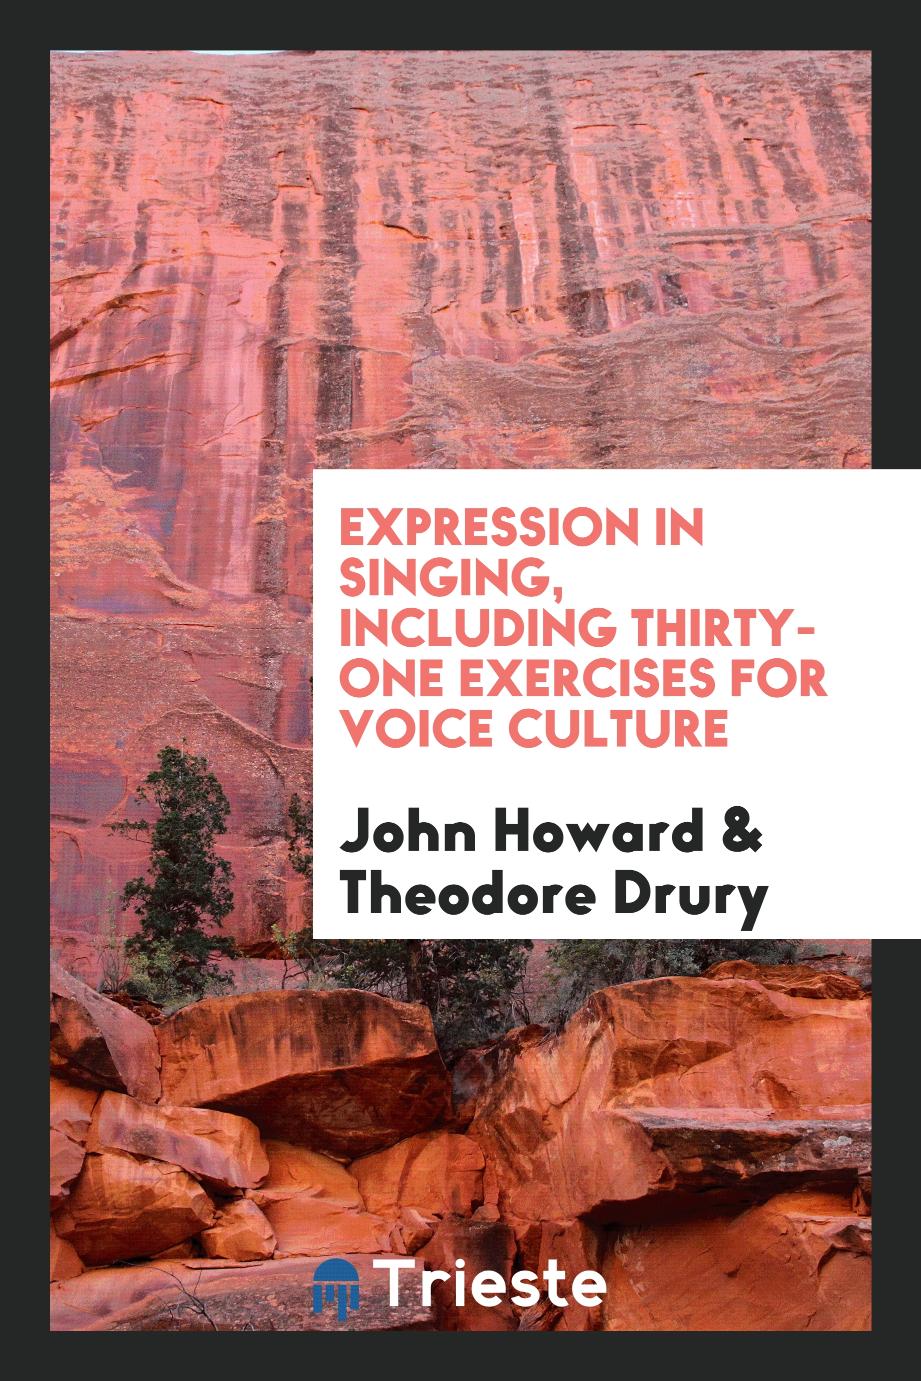 Expression in singing, including thirty-one exercises for voice culture